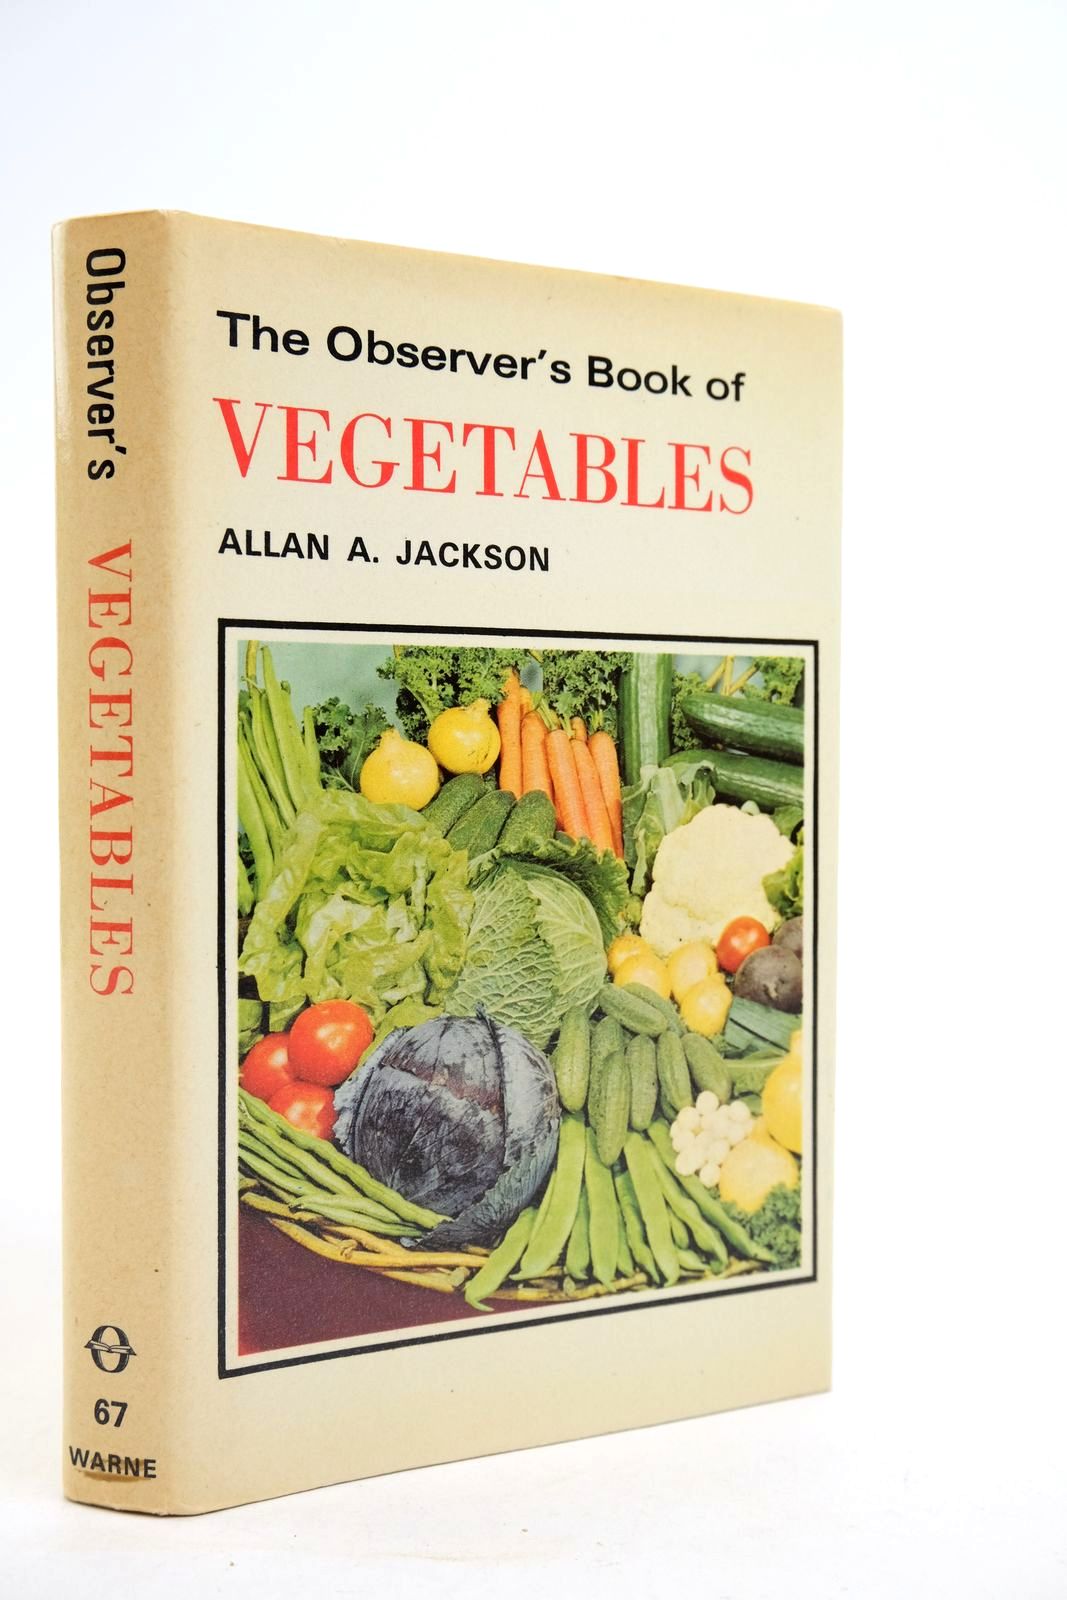 Photo of THE OBSERVER'S BOOK OF VEGETABLES written by Jackson, Allan A. published by Frederick Warne (STOCK CODE: 2140951)  for sale by Stella & Rose's Books